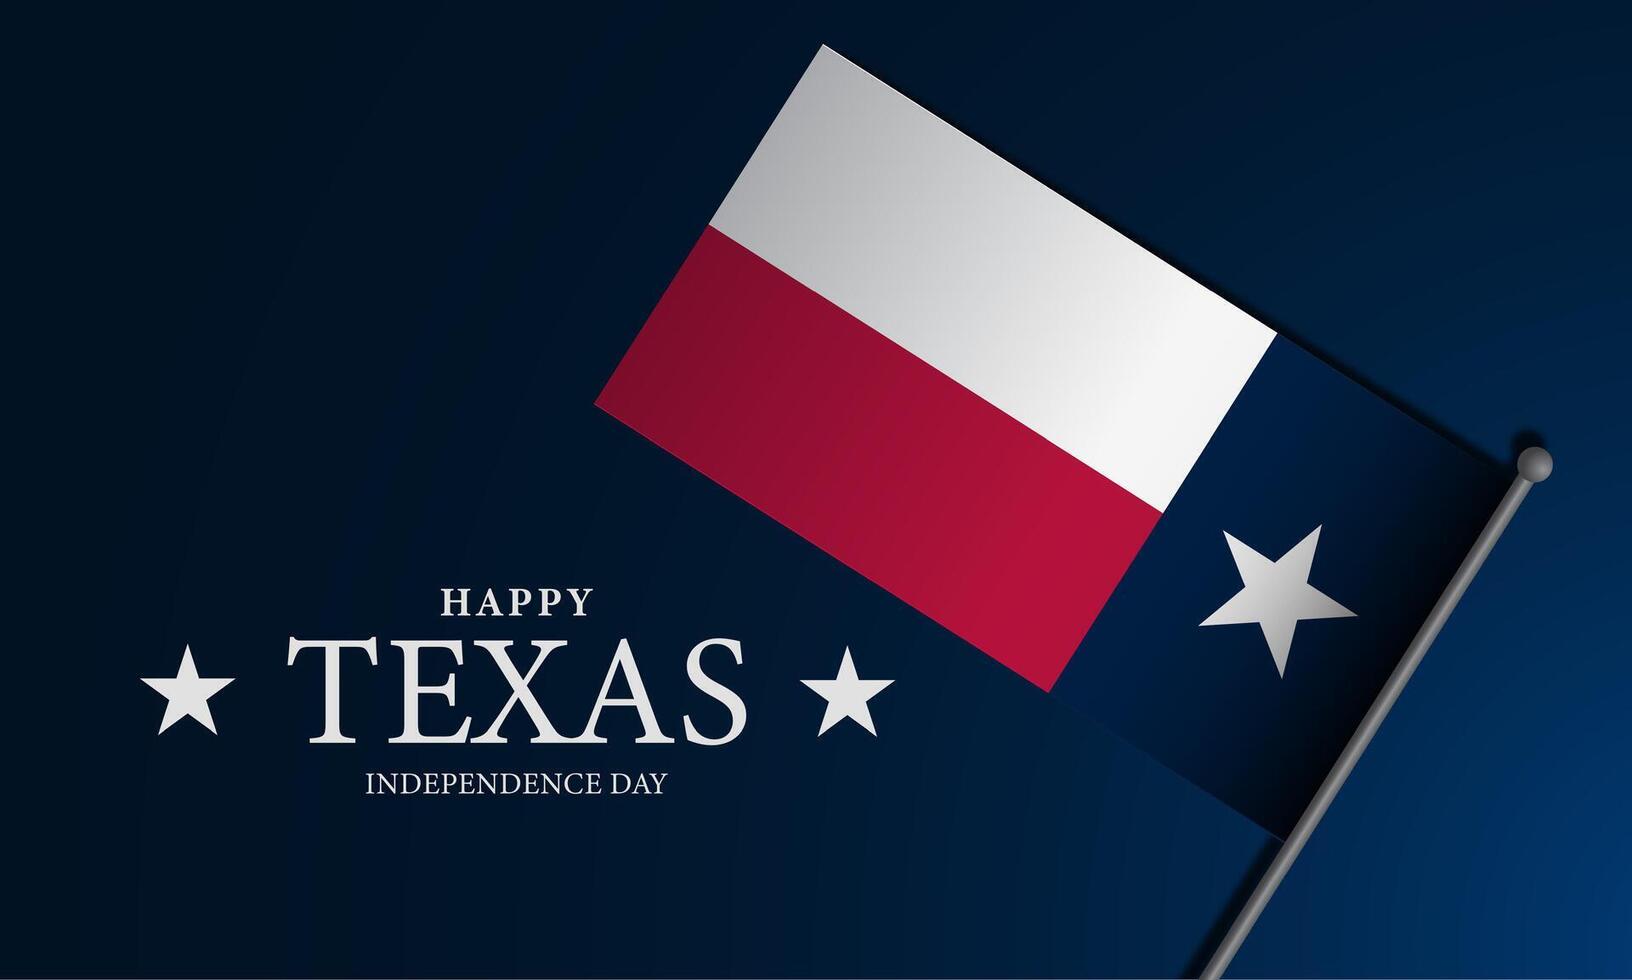 Texas Independence Day Background vector illustration